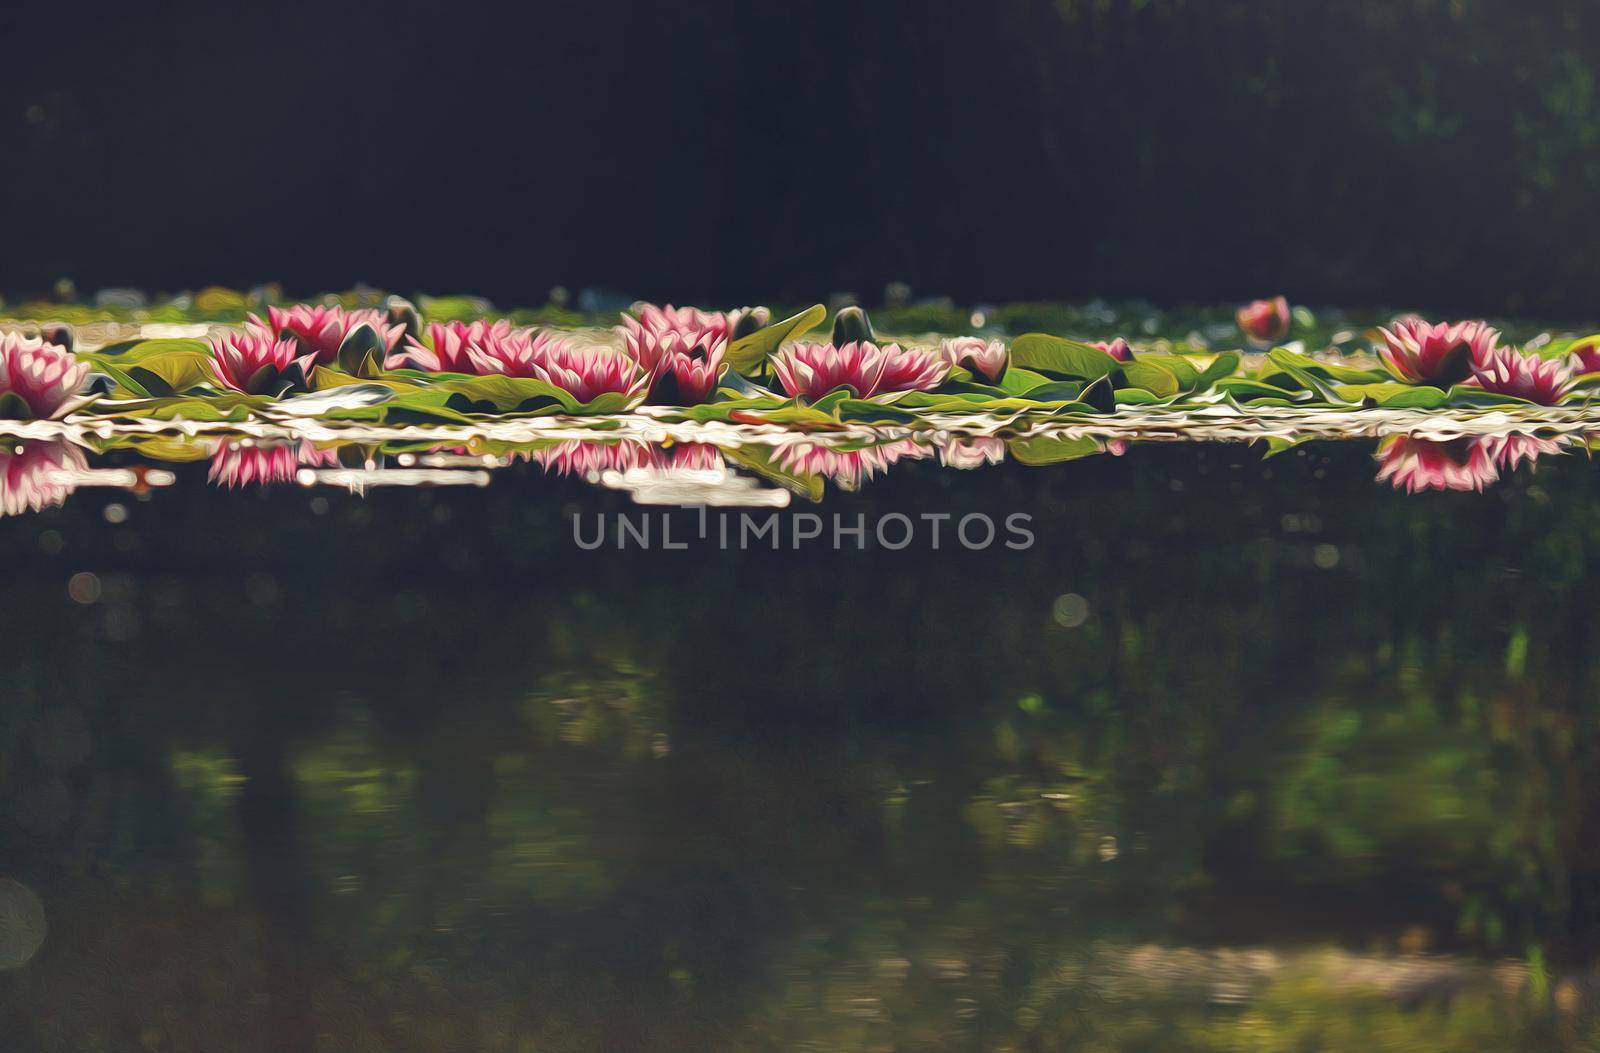 Oil painting of Waterlily floating in garden pond with reflection. Horizontal landscape by Gravika